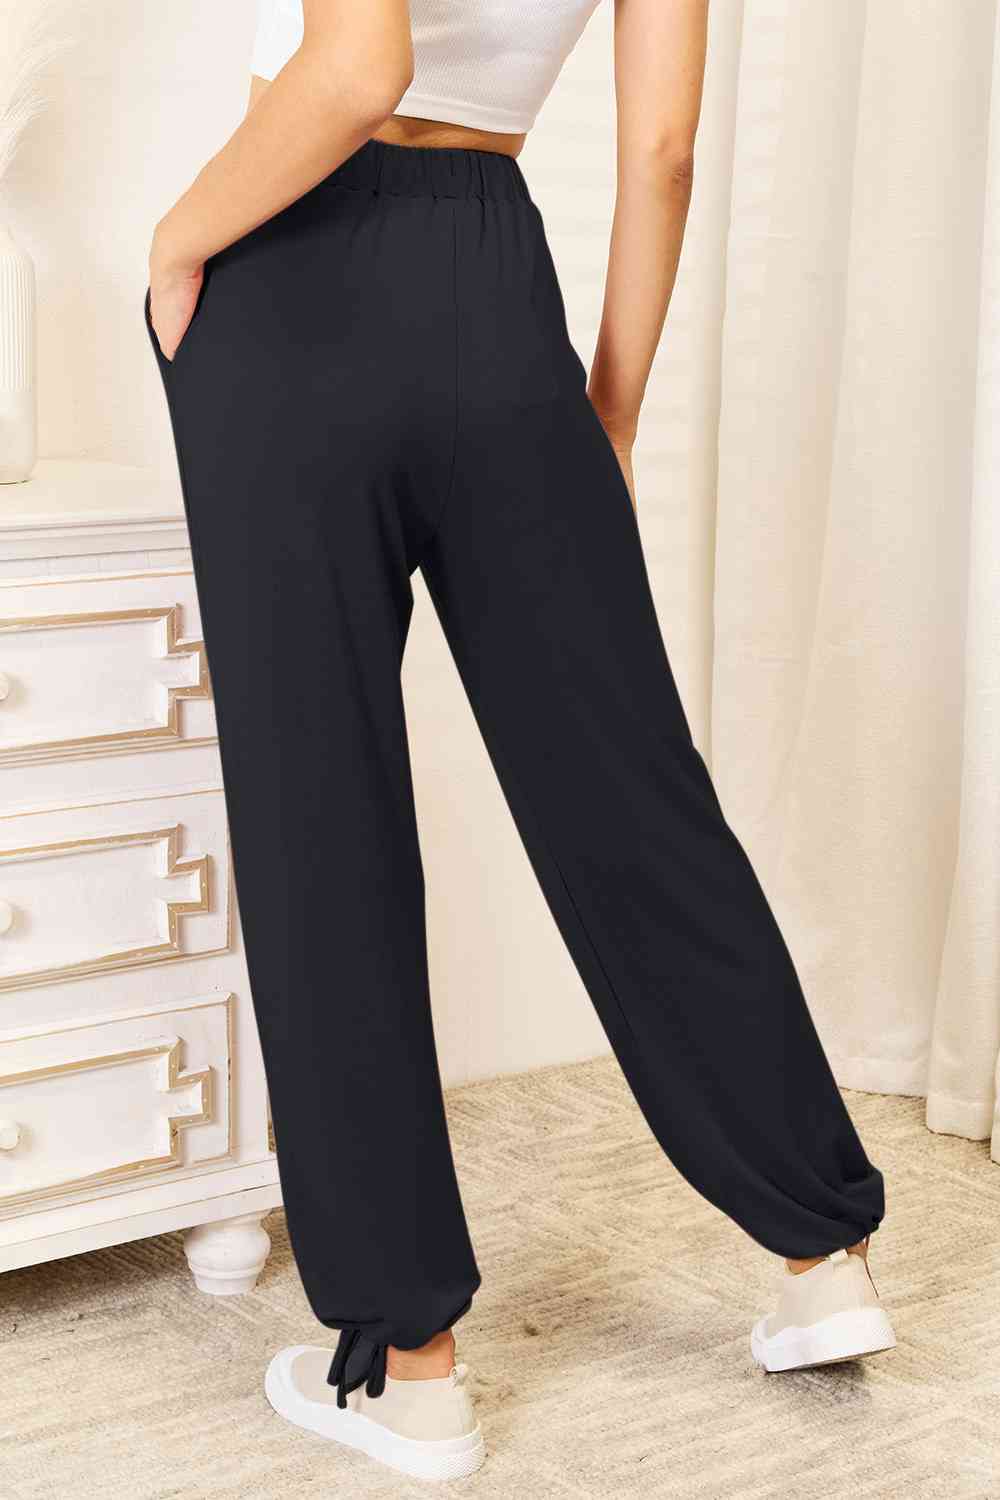 Soft Rayon Drawstring Waist Pants with Pockets - Kawaii Stop - Basic Bae, Casual Chic, Comfortable Style, Custom Fit, Drawstring Waist Pants, Everyday Wear, High-Quality Material, Lounge Pants, Must-Have Pants, Opaque Fabric, Practical Pockets, Ship from USA, Stylish Outfit, Wardrobe Essential